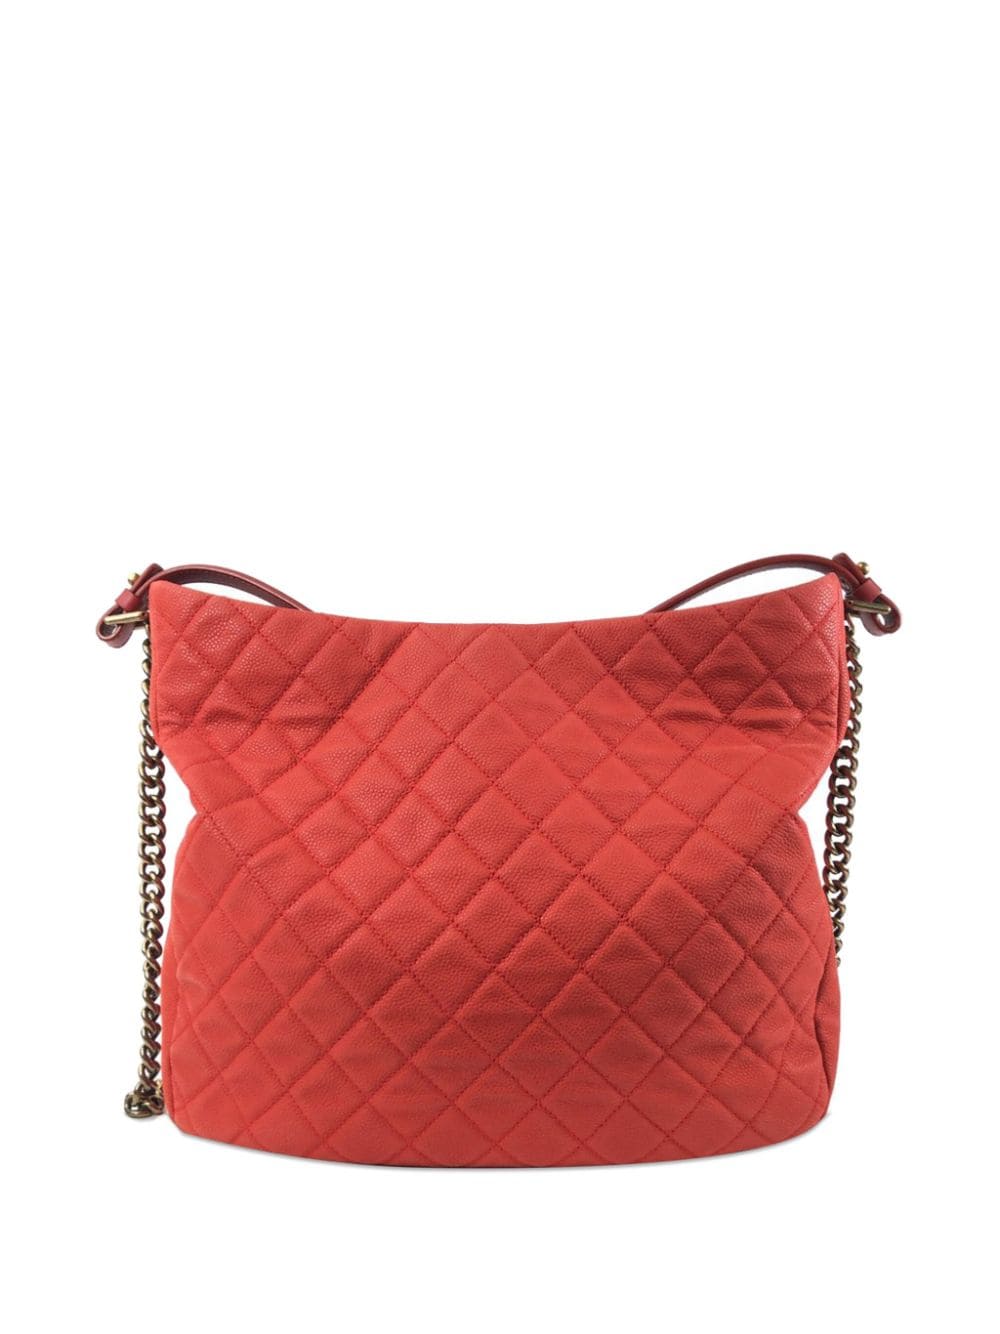 Pre-owned Chanel 2012-2013 Caviar Country Chic Hobo Satchel In Red